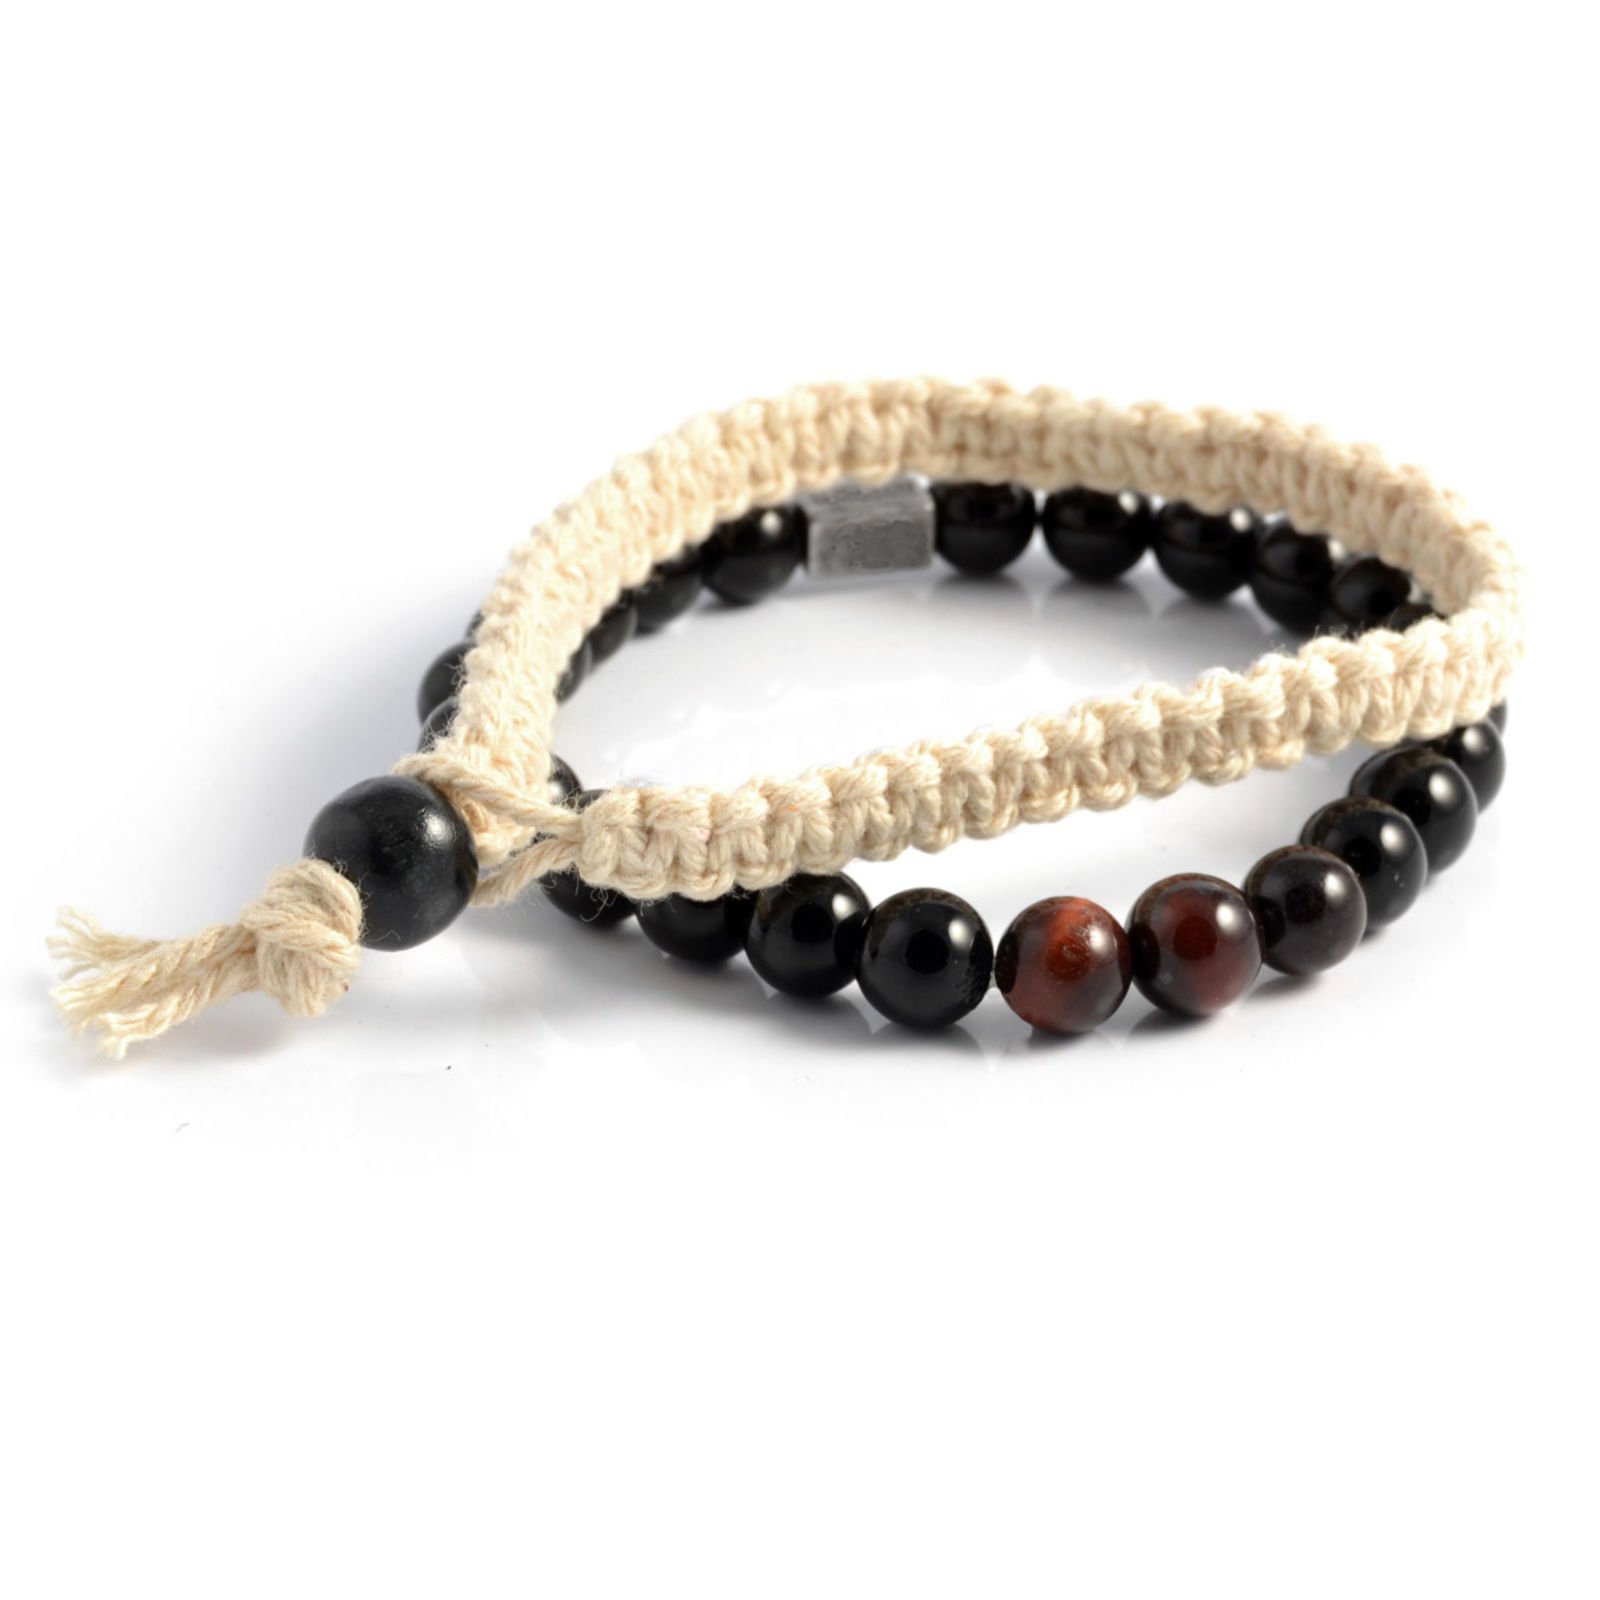 Unisex Clover Stone String Bracelets With Charms With Adjustable Fit  Designer Fashion Jewelry For Men And Women In Top292J From Yscrd, $24.96 |  DHgate.Com